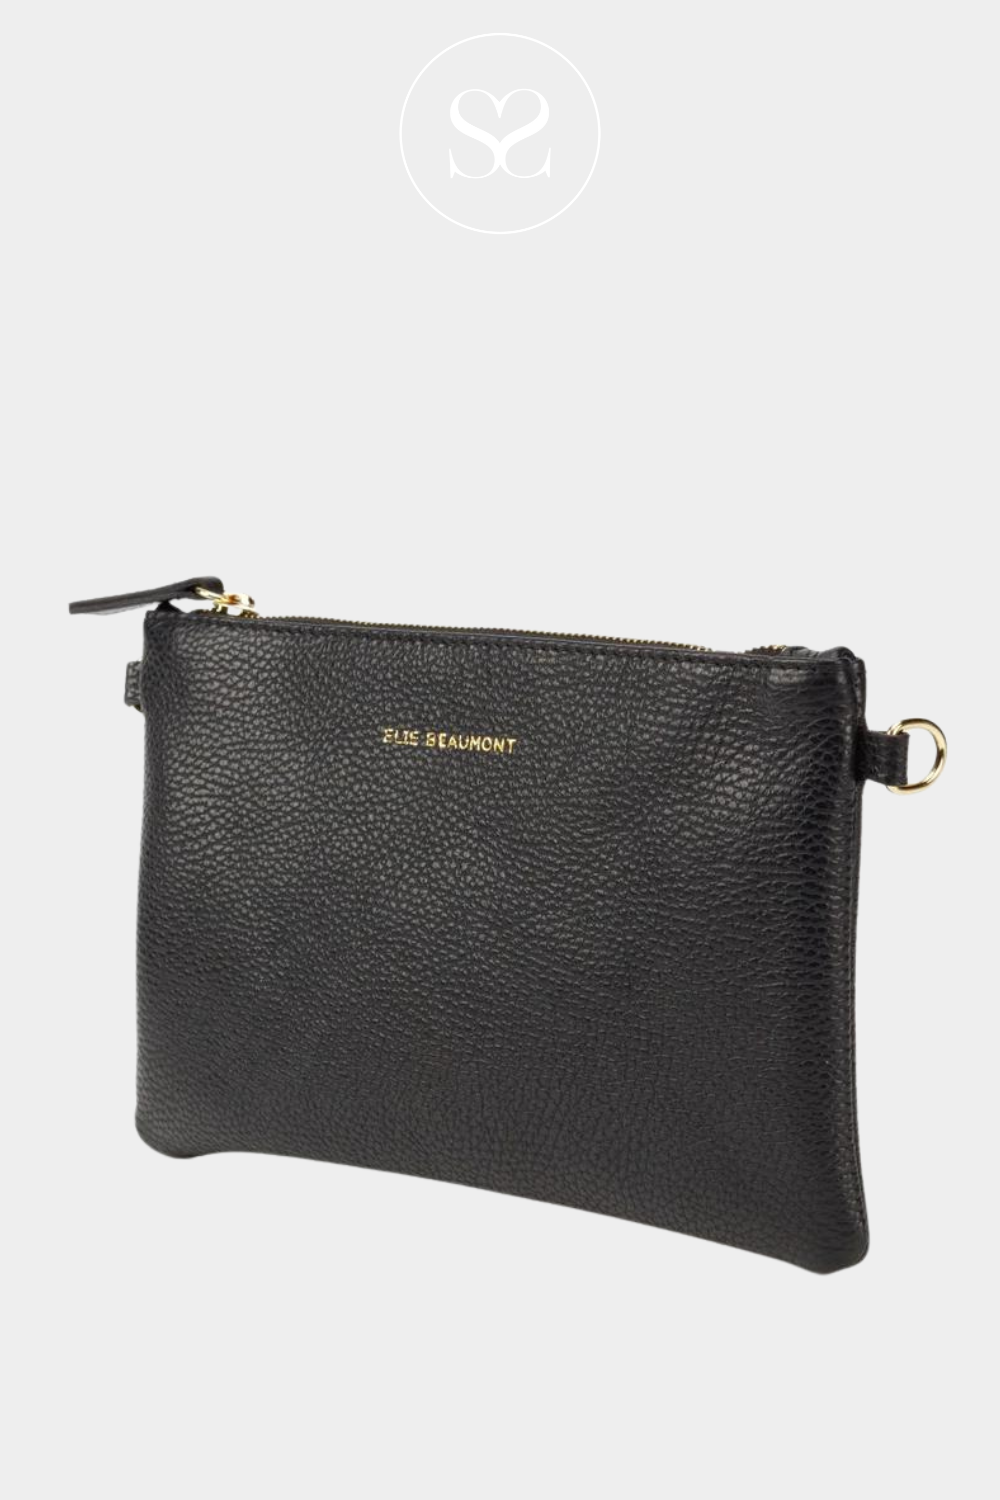 slimline wristlet from Elie Beaumont in Black Leather